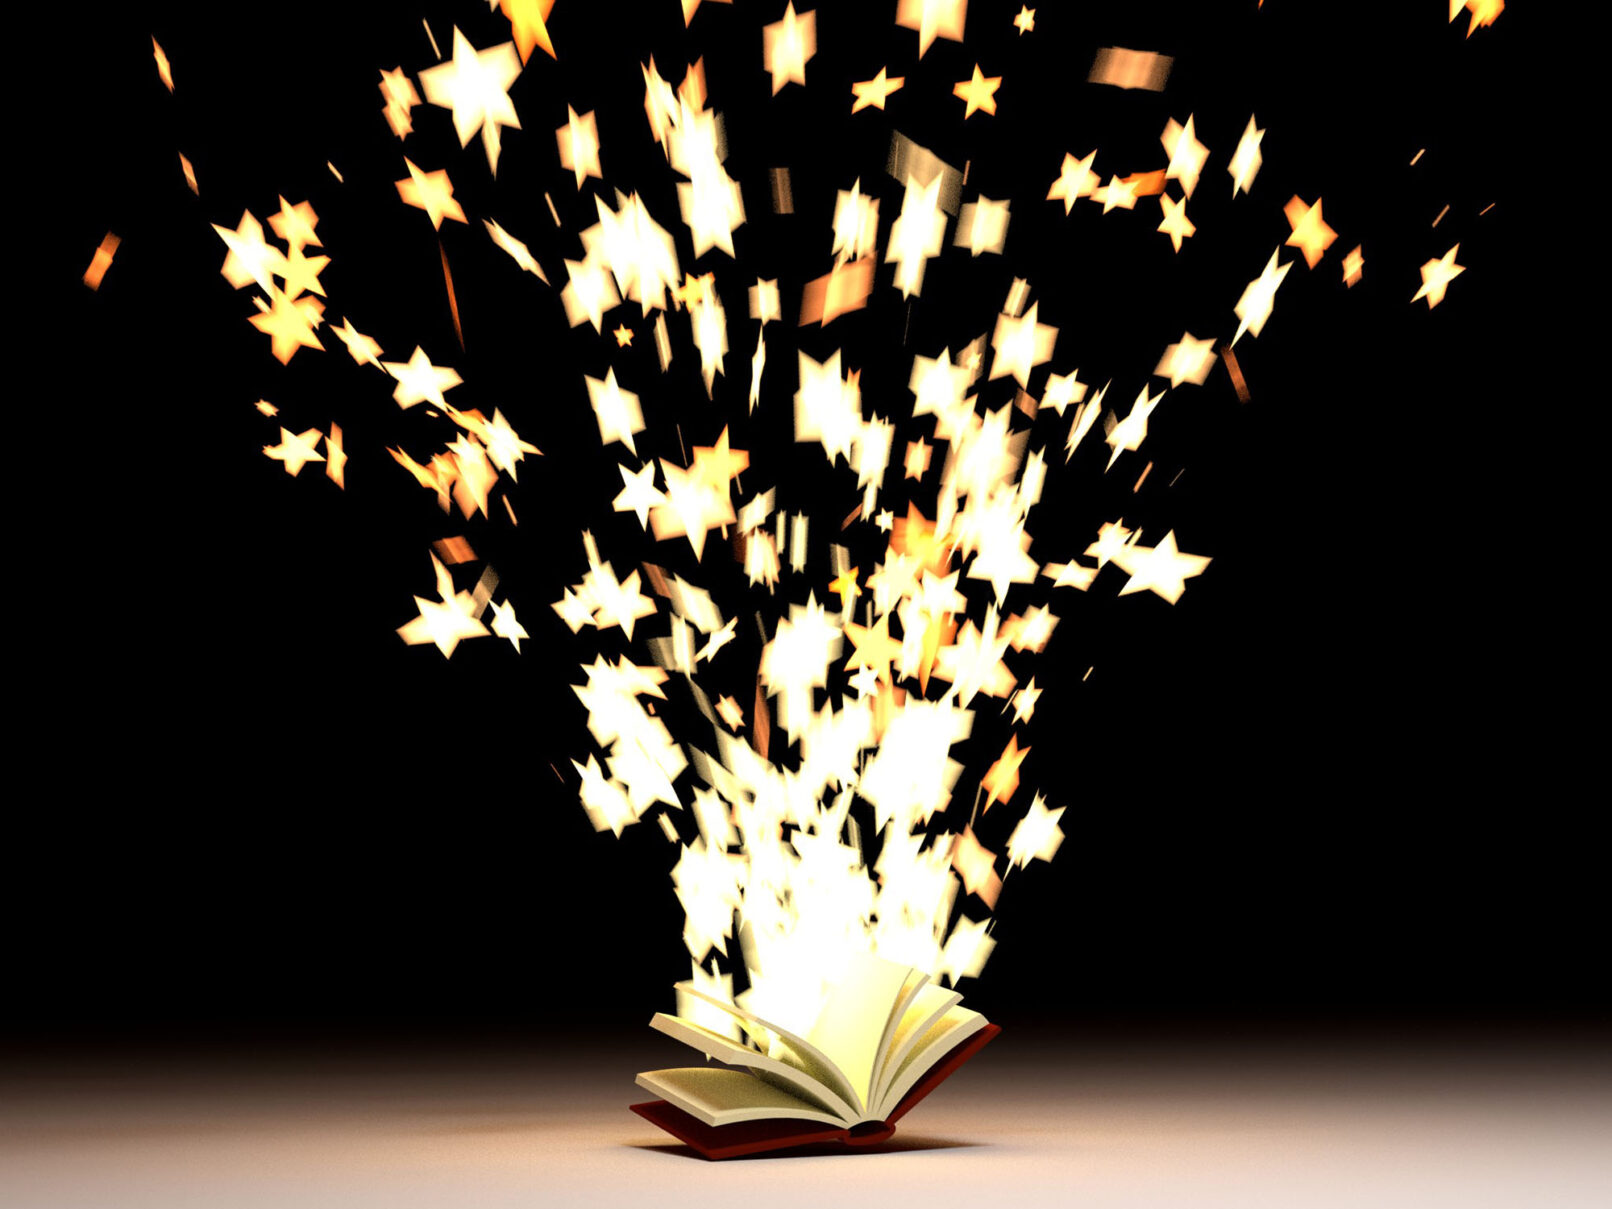 Stars fly like sparks from an open book